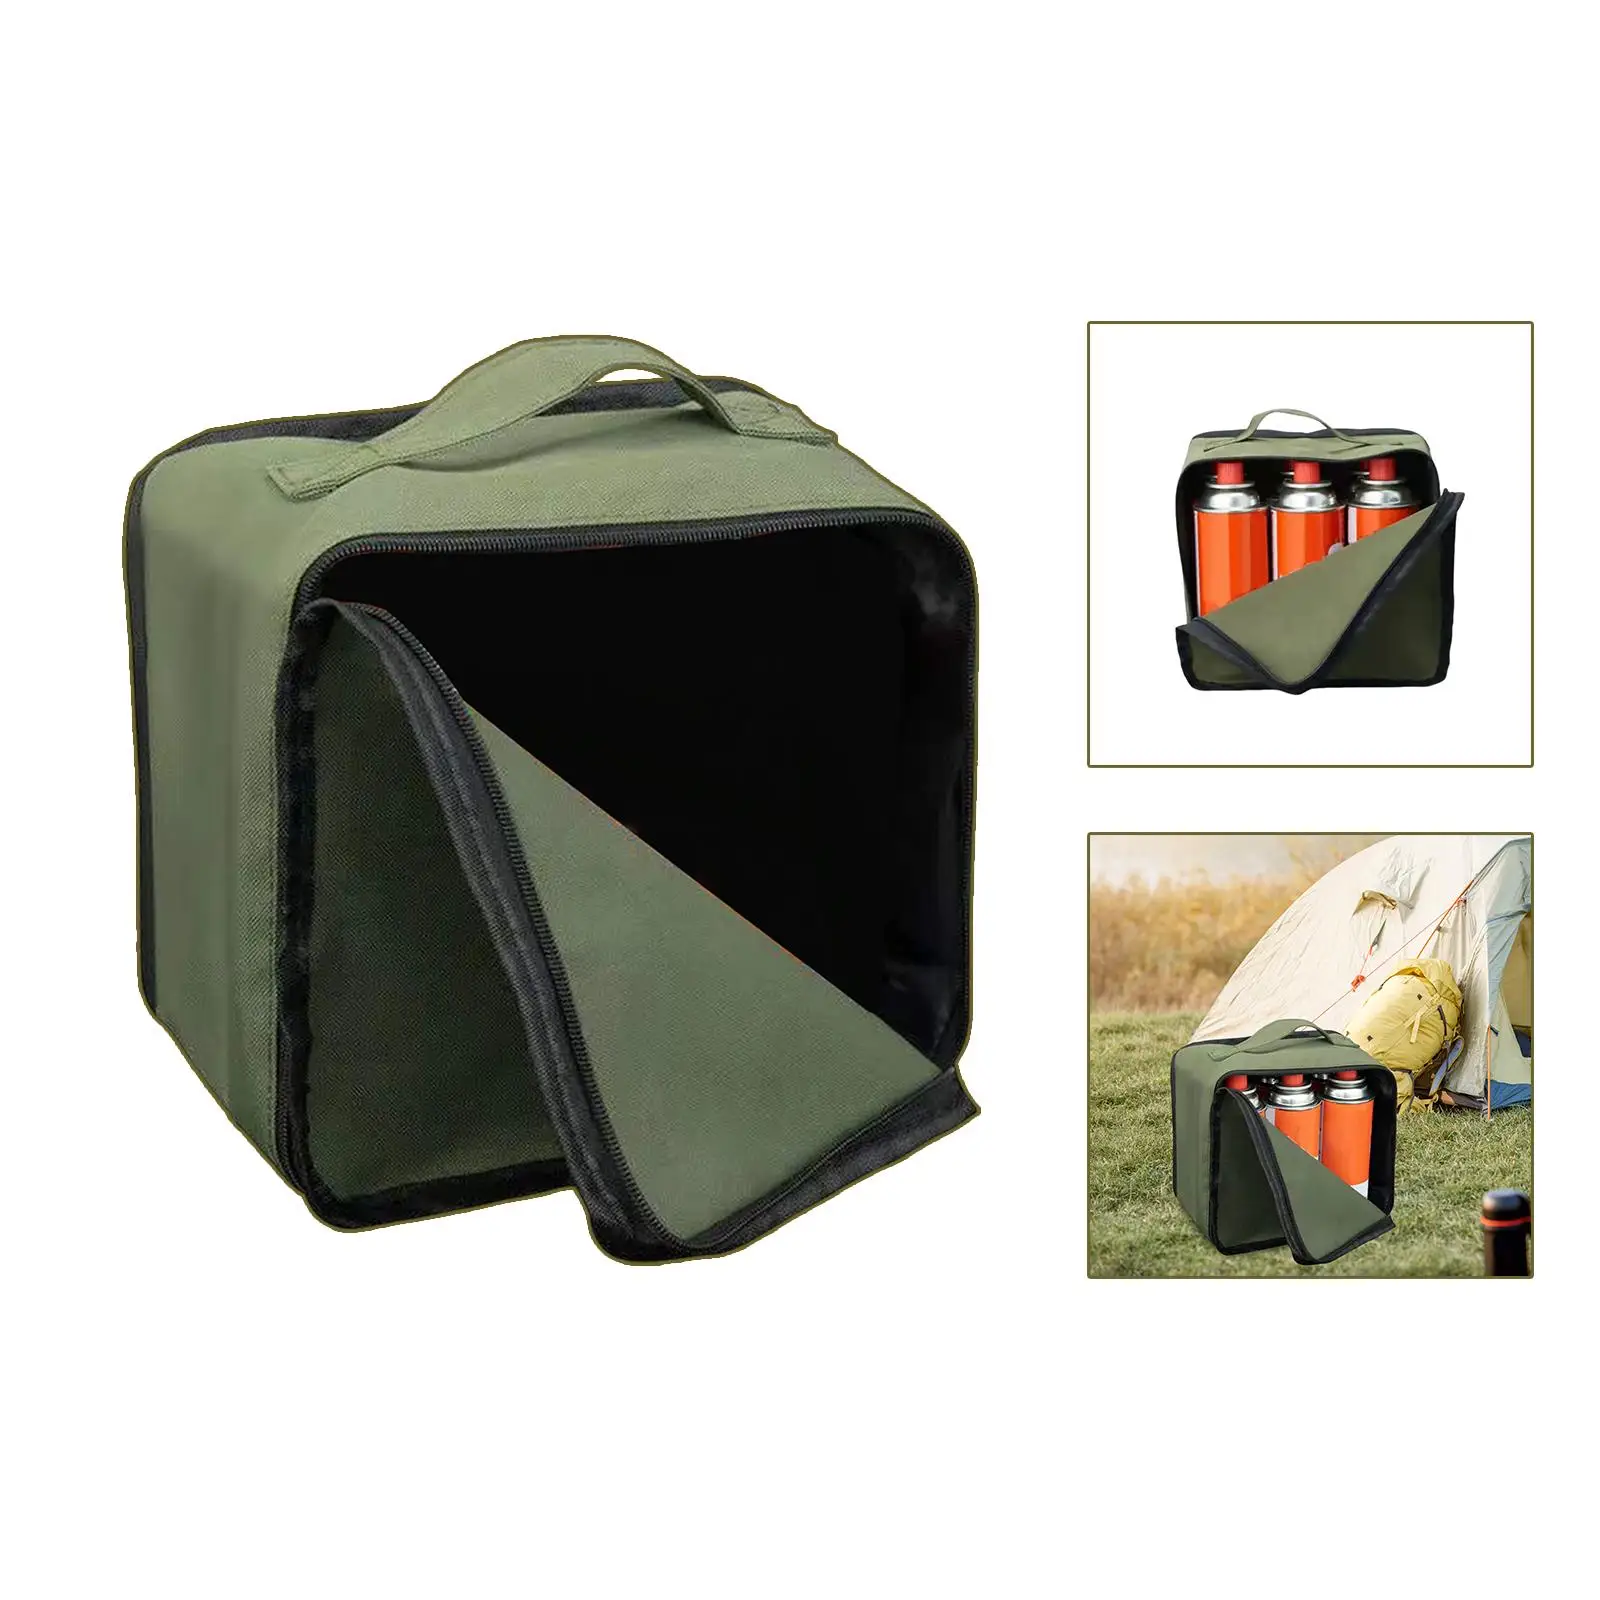 Gas Tank Storage Bags Stable Large Capacity Protect Bag Durable Convenient Tool Bag for Outdoor Picnic Kitchen Backpacking